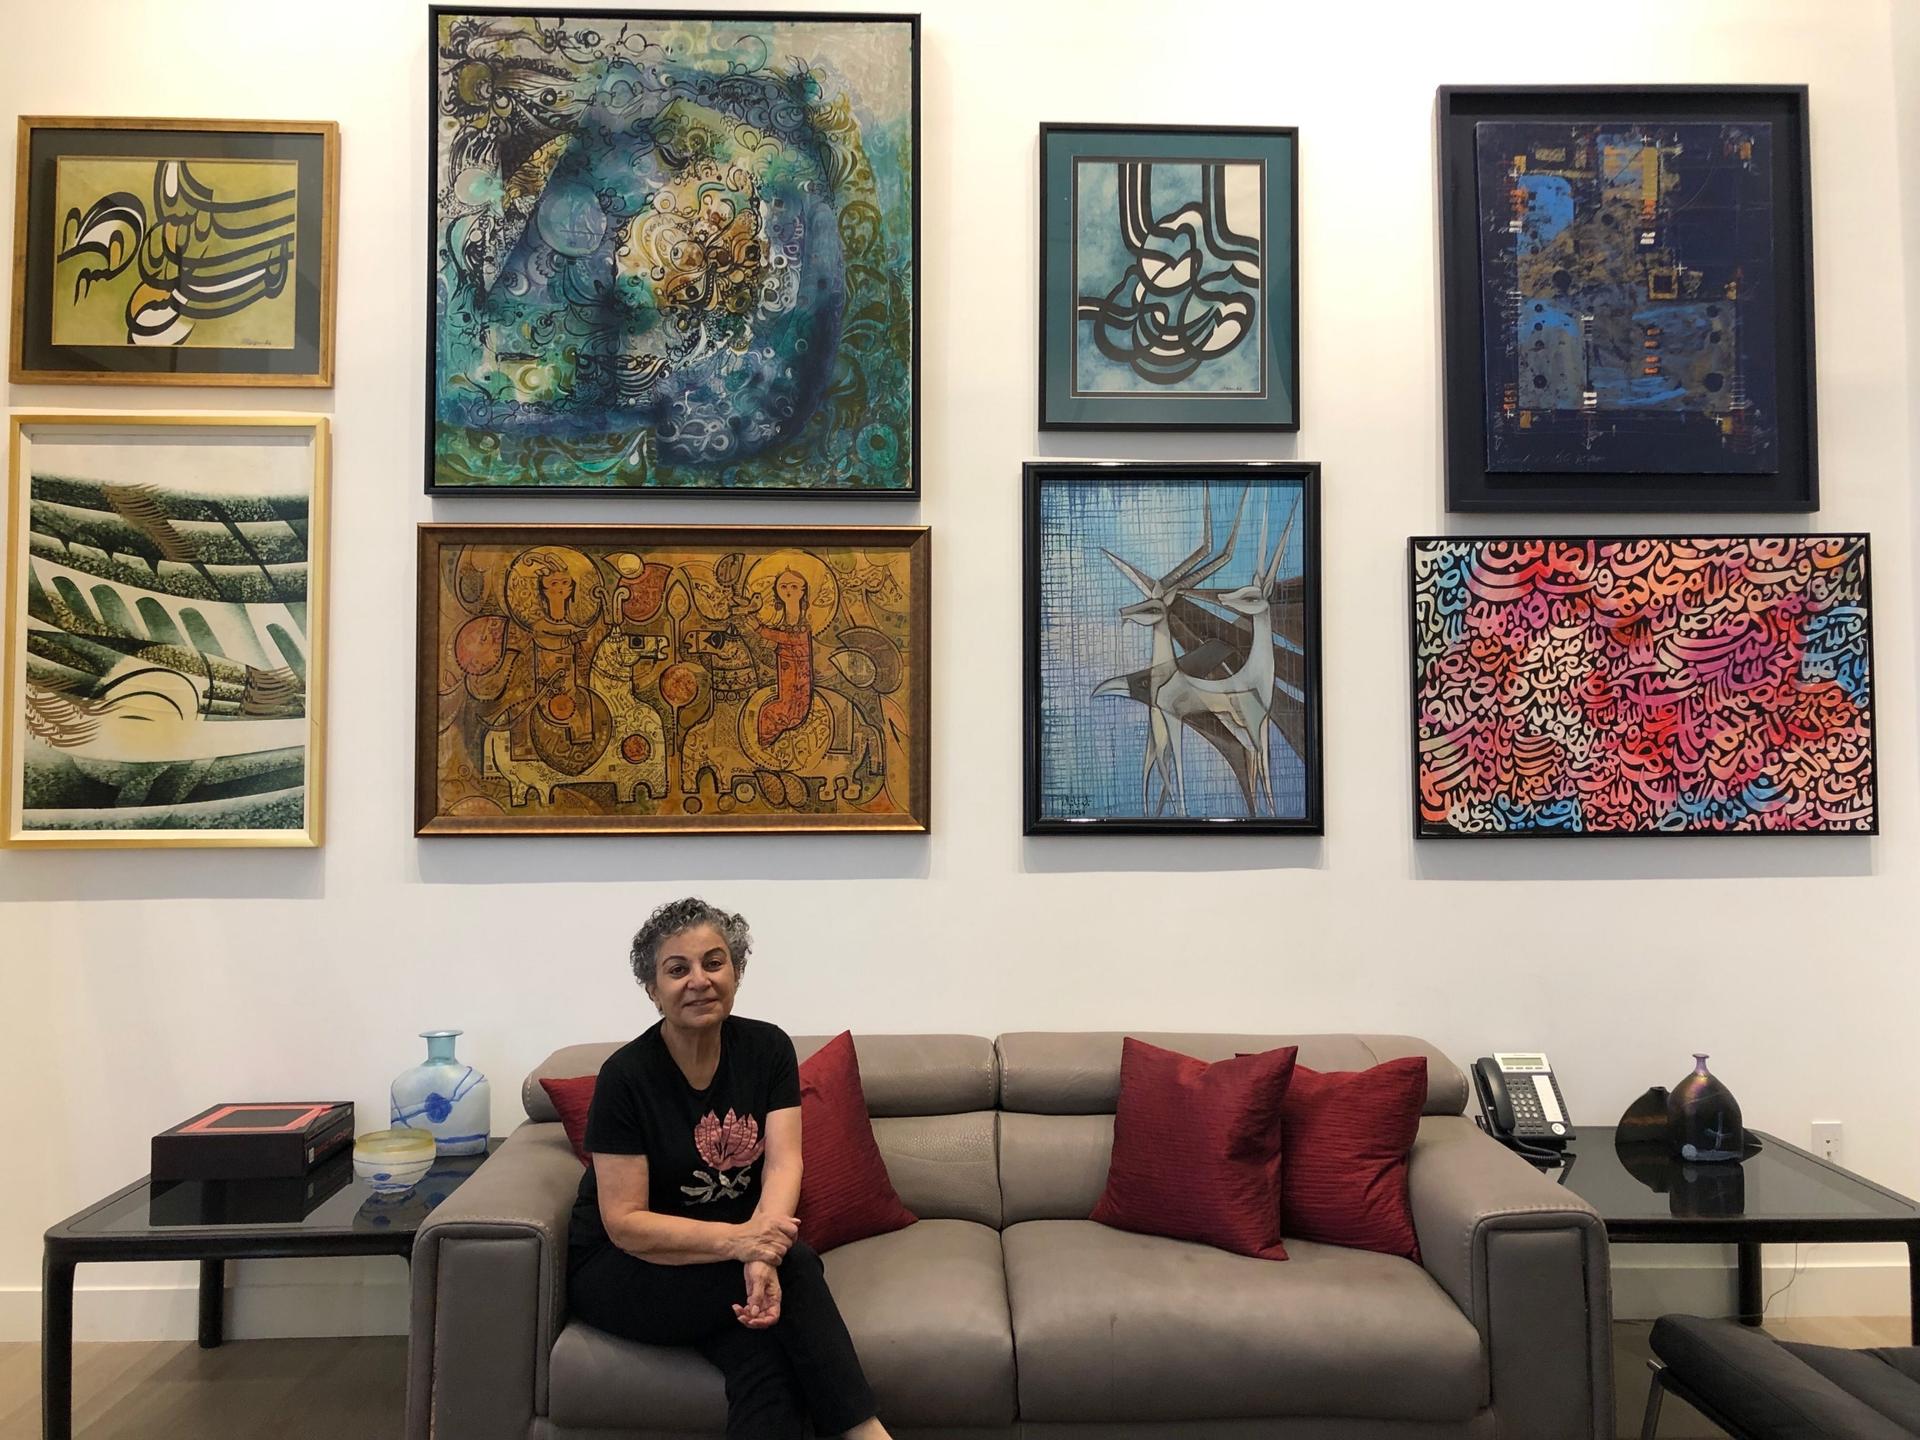 A woman sits on a couch with several works of art behind her.